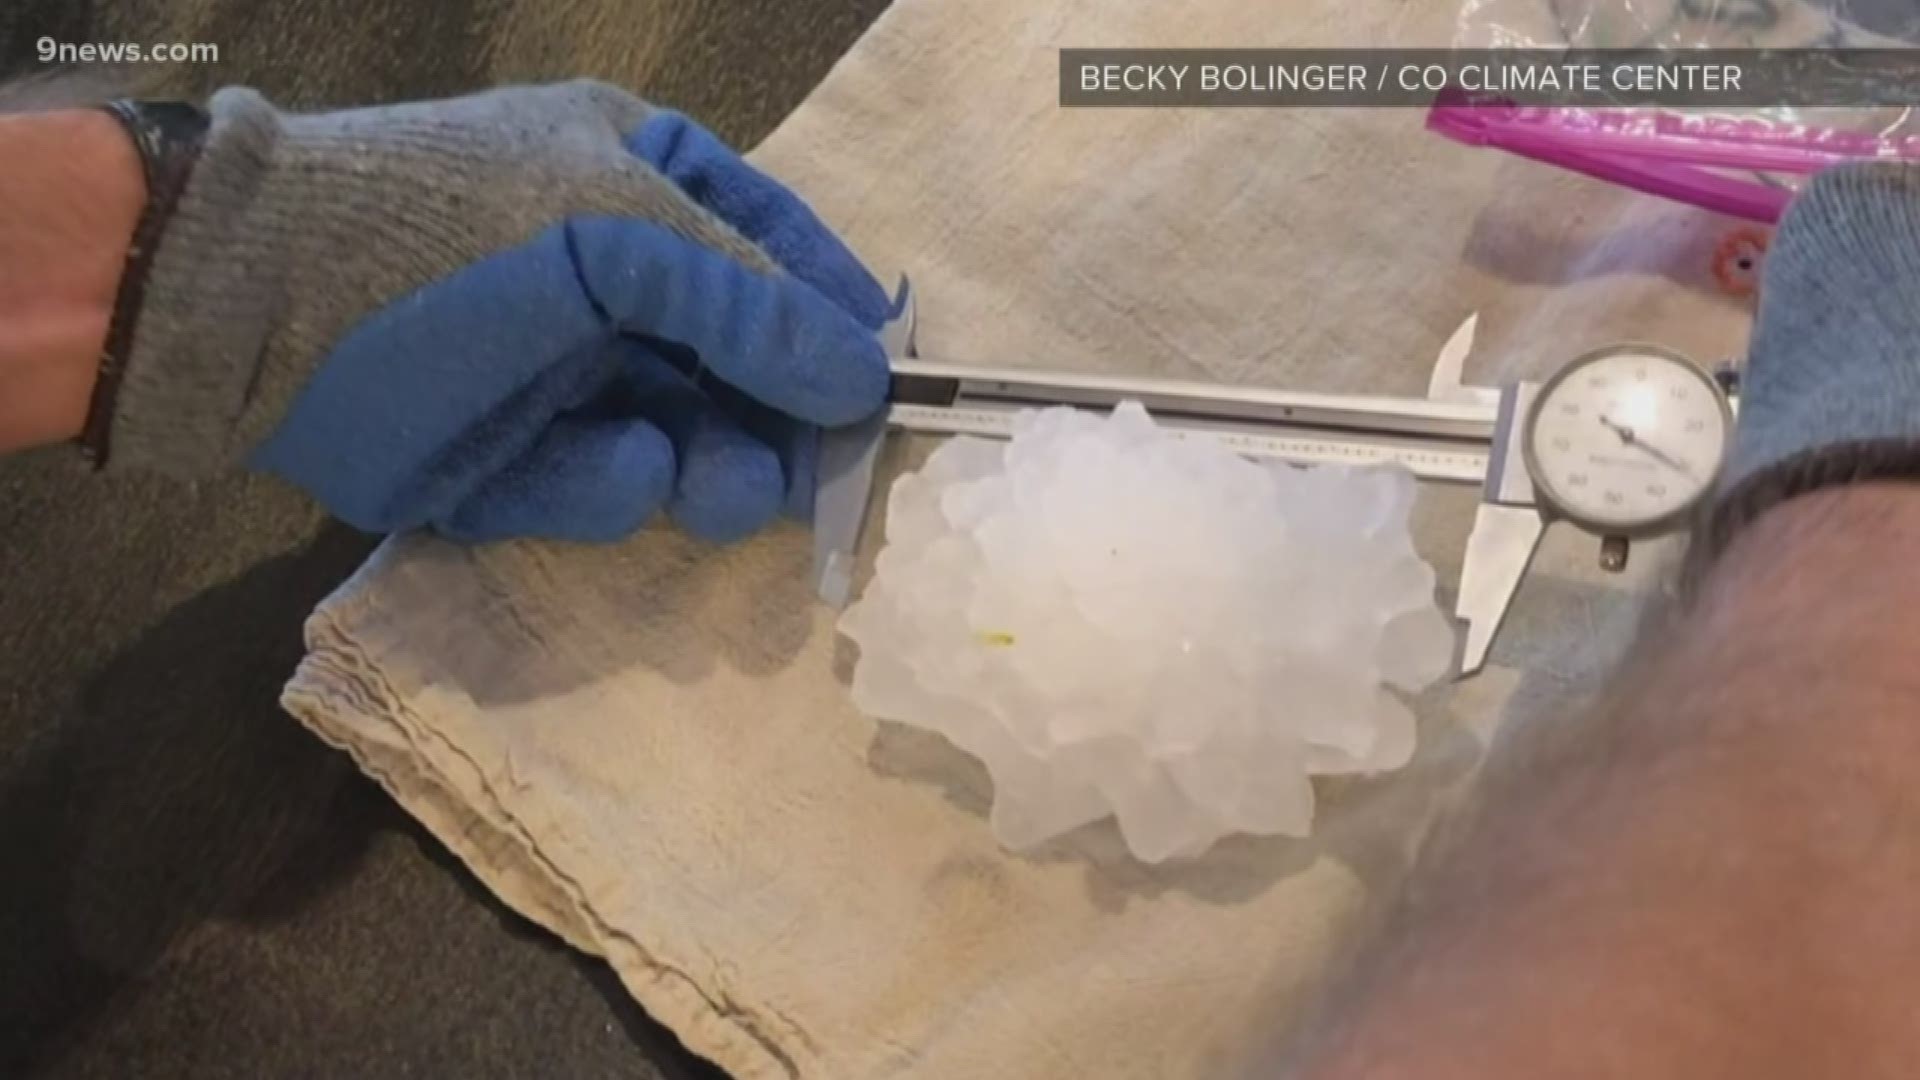 The hail appears to have broken the record of 4.5 inches in diameter but the findings aren't official yet.